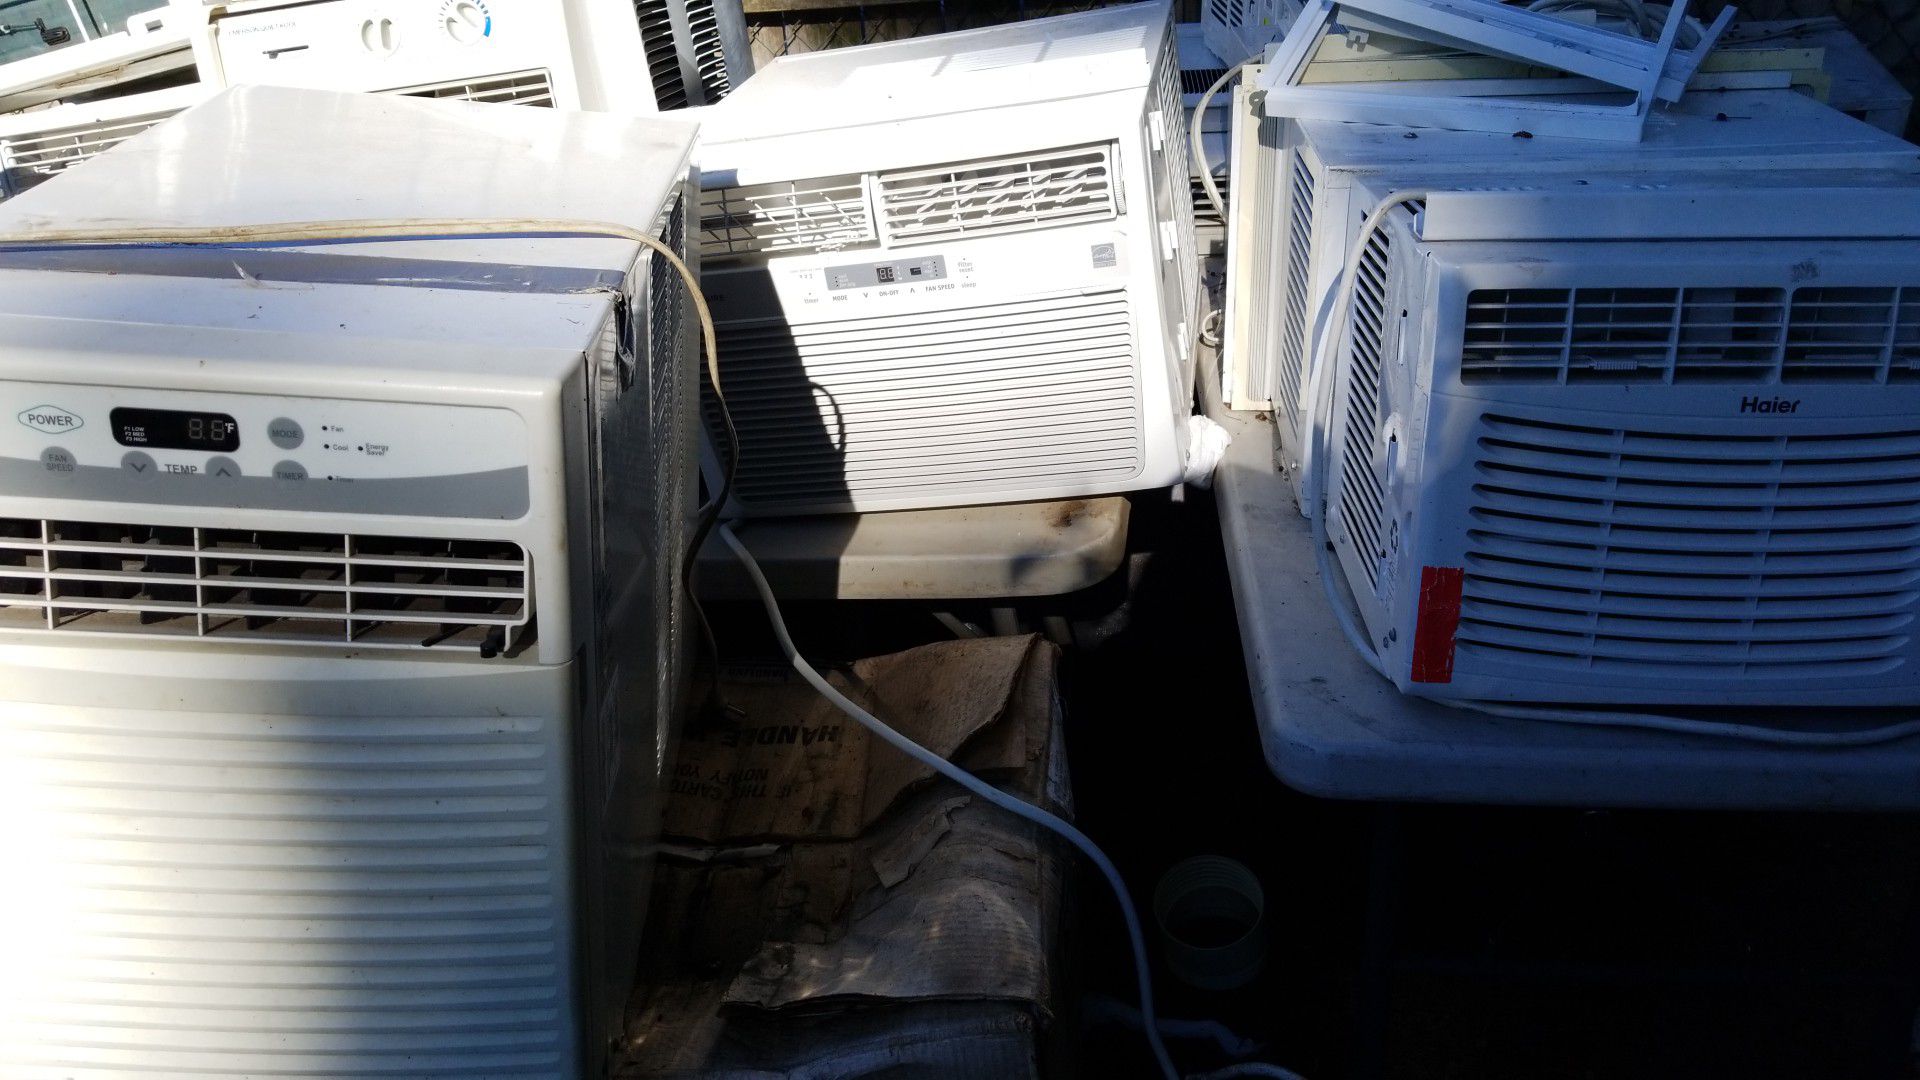 AC units conditioner cool off